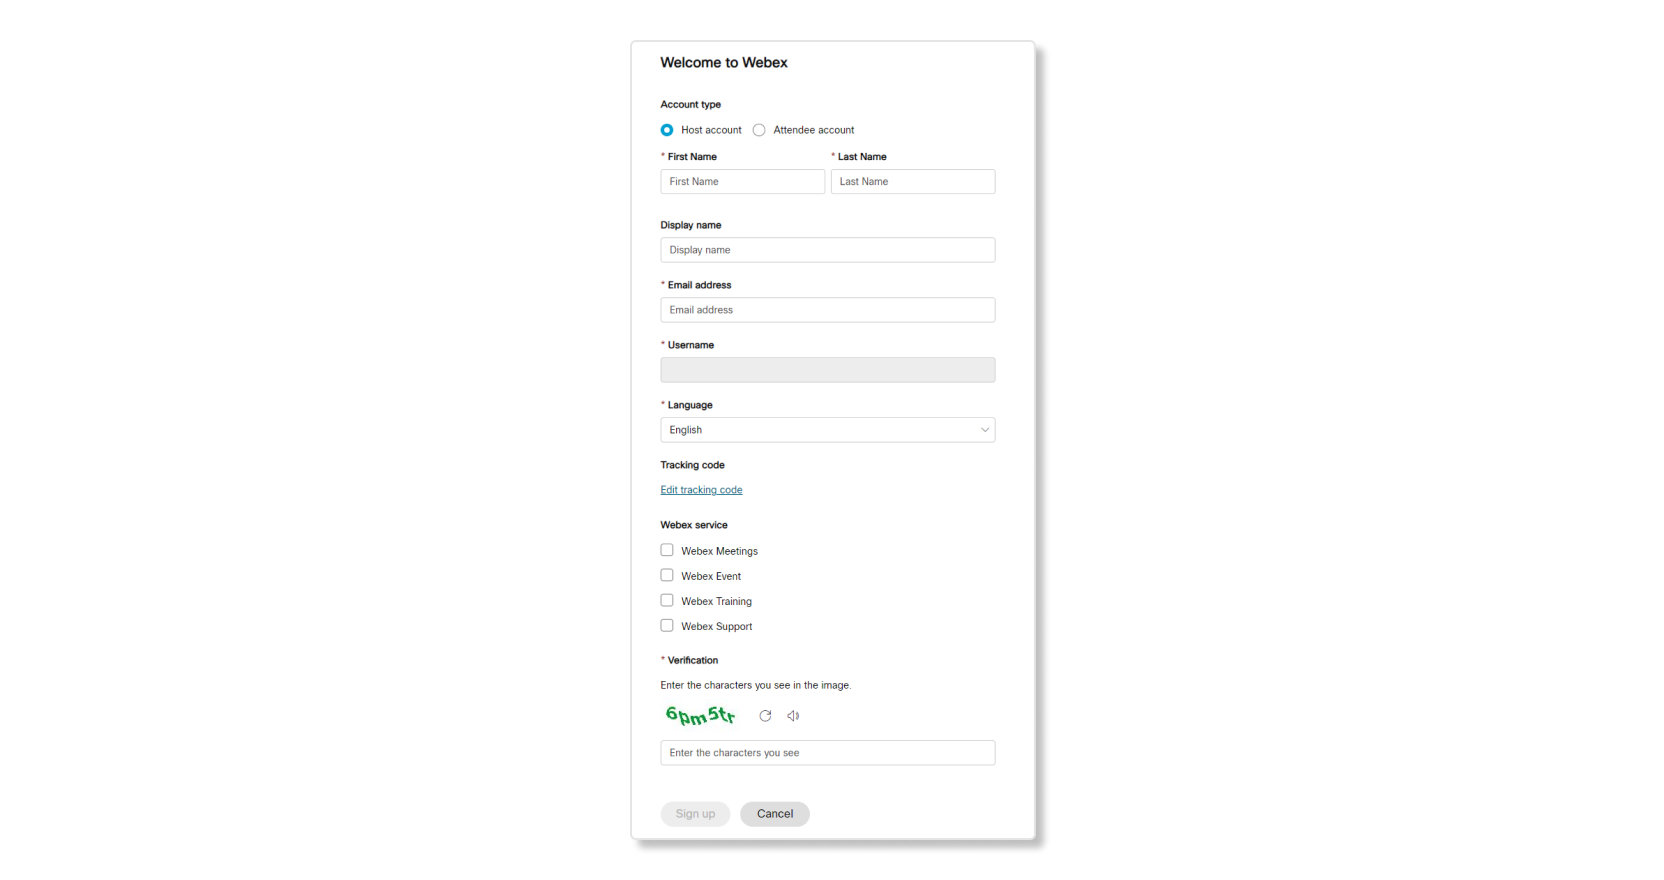 Self-sign up form for host account on a Webex site